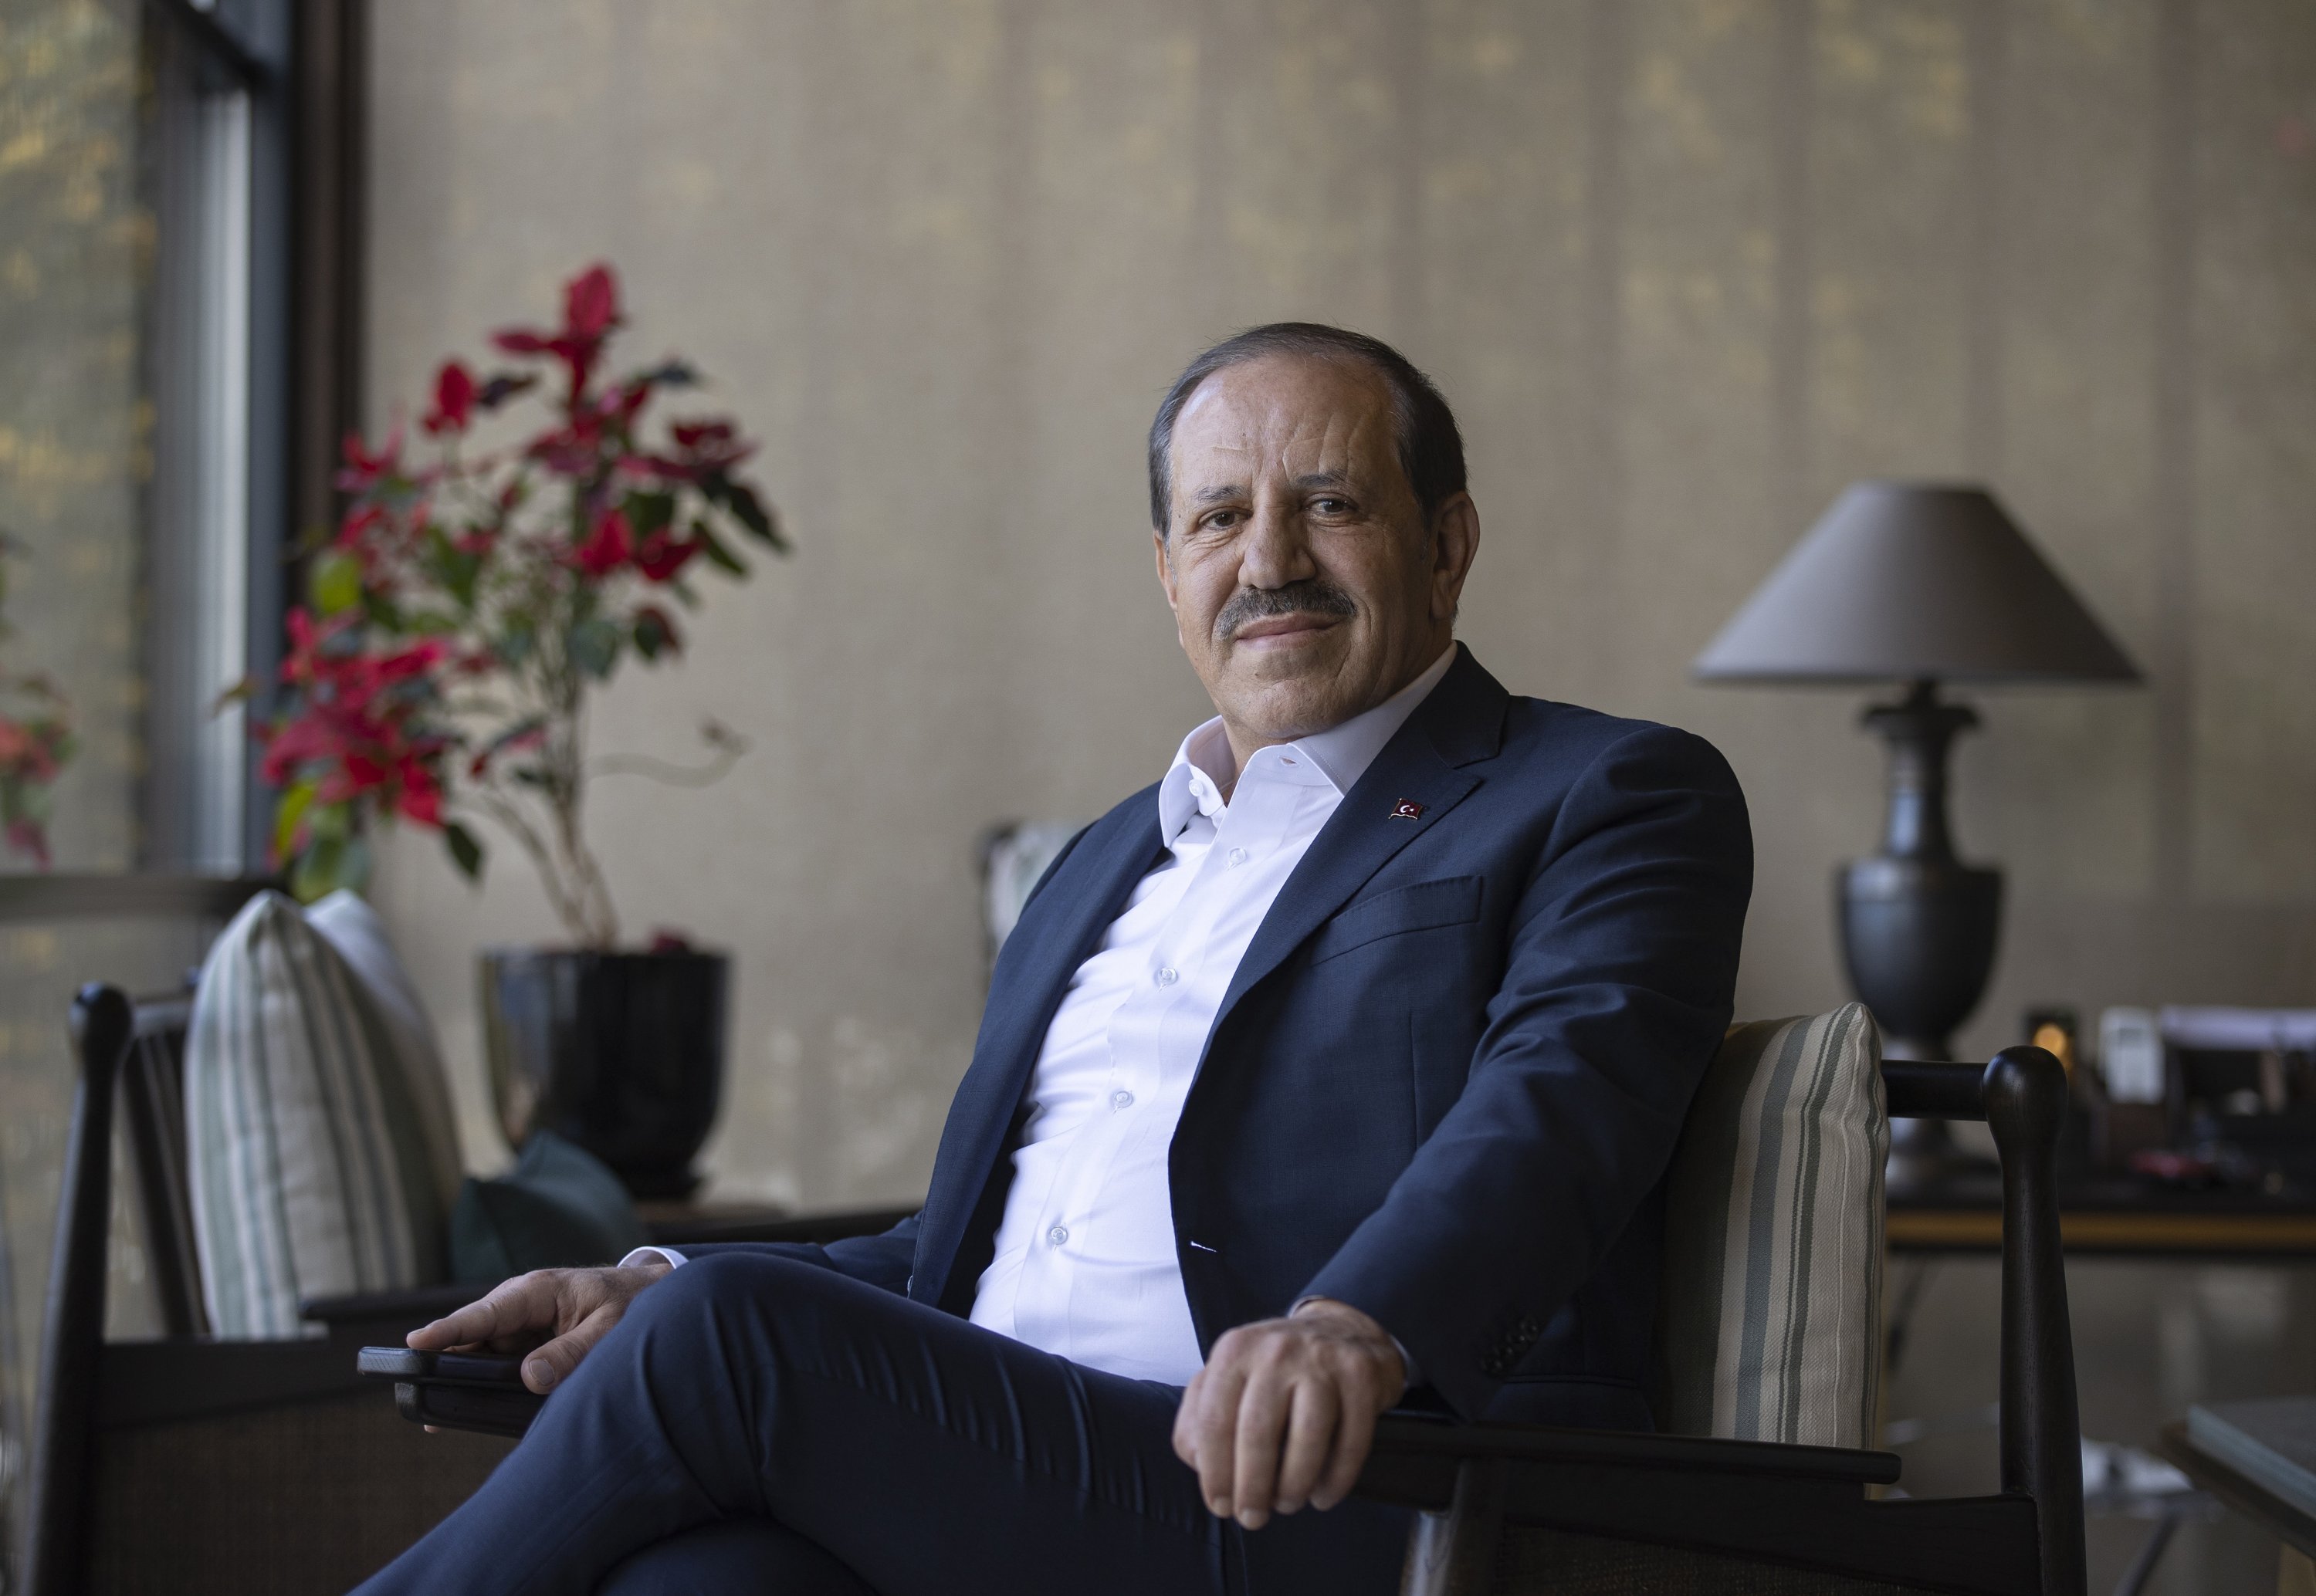 Cemal Kalyoncu, the chairperson of the board of directors of Kalyon Holding, during an interview in Istanbul, Turkey, April 18, 2022. (AA Photo)